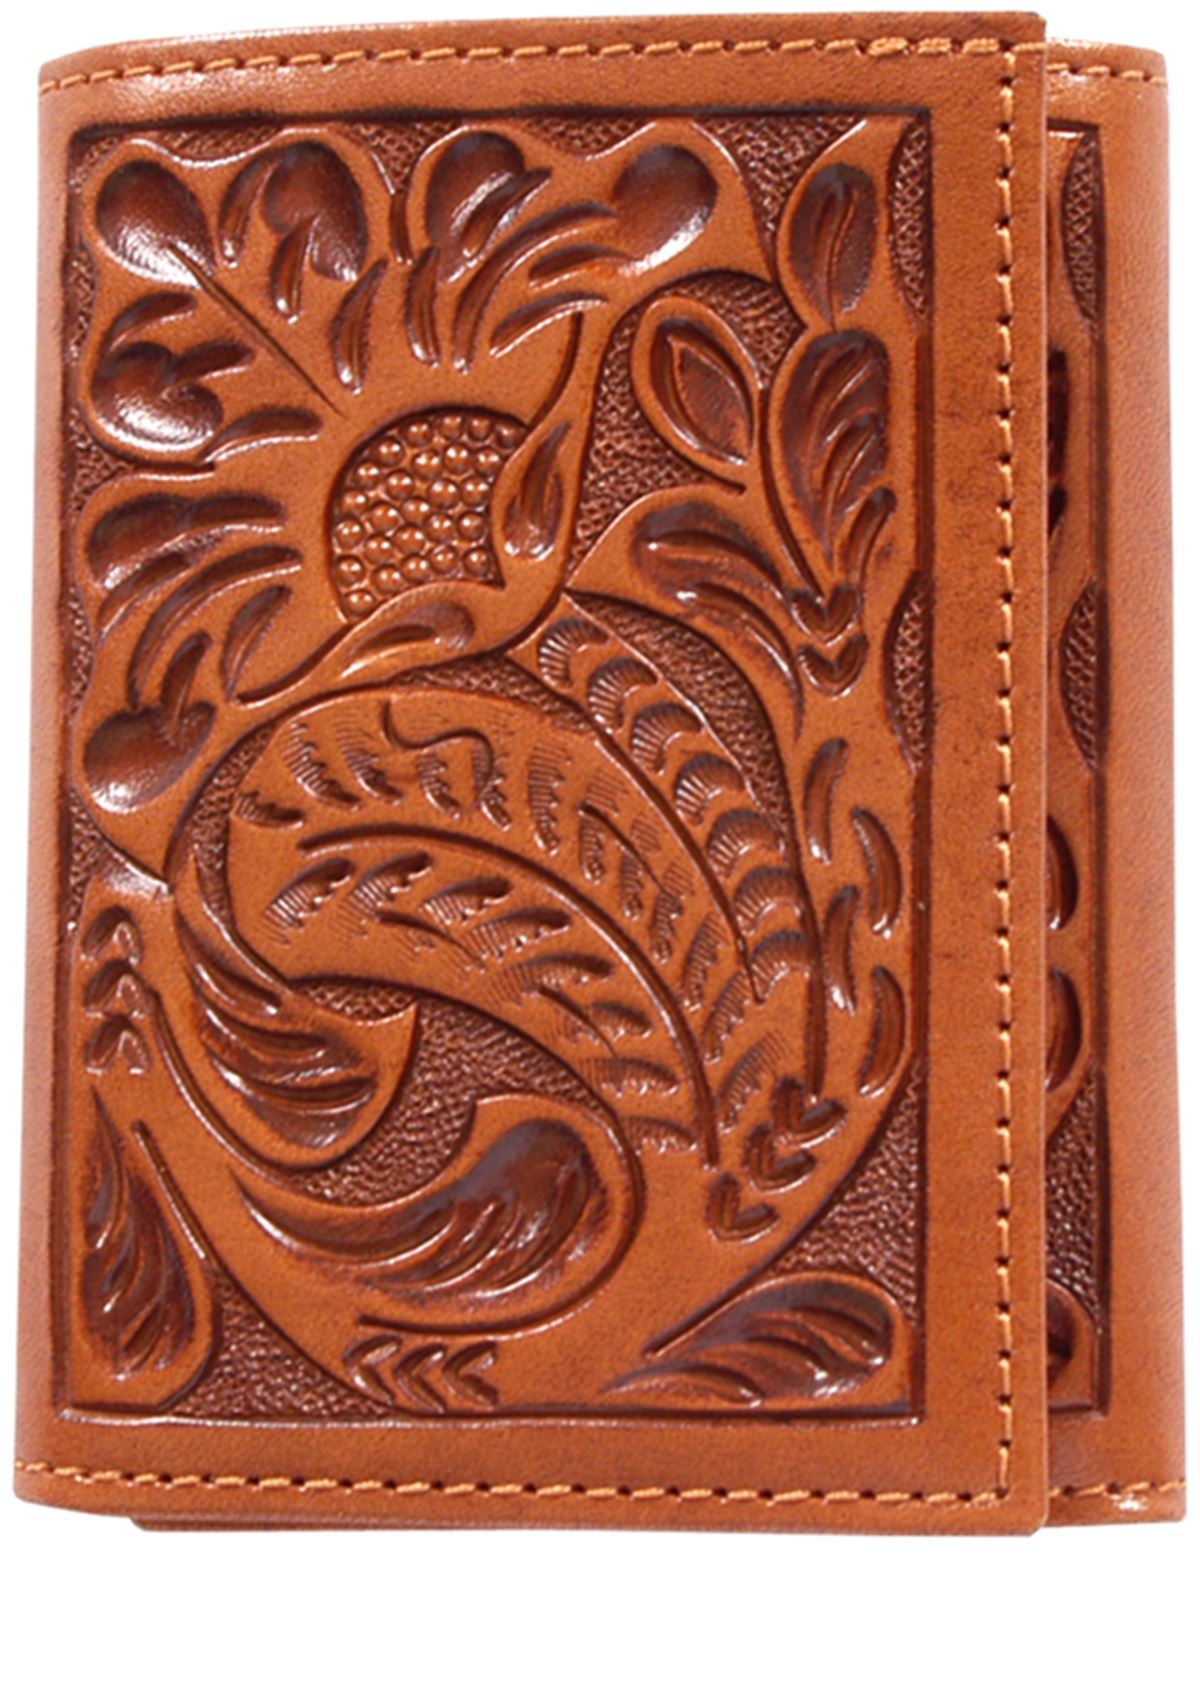 3D Natural Cow Leather Mens Western Trifold Wallet Hand Carved Tooled 27AW103 | eBay